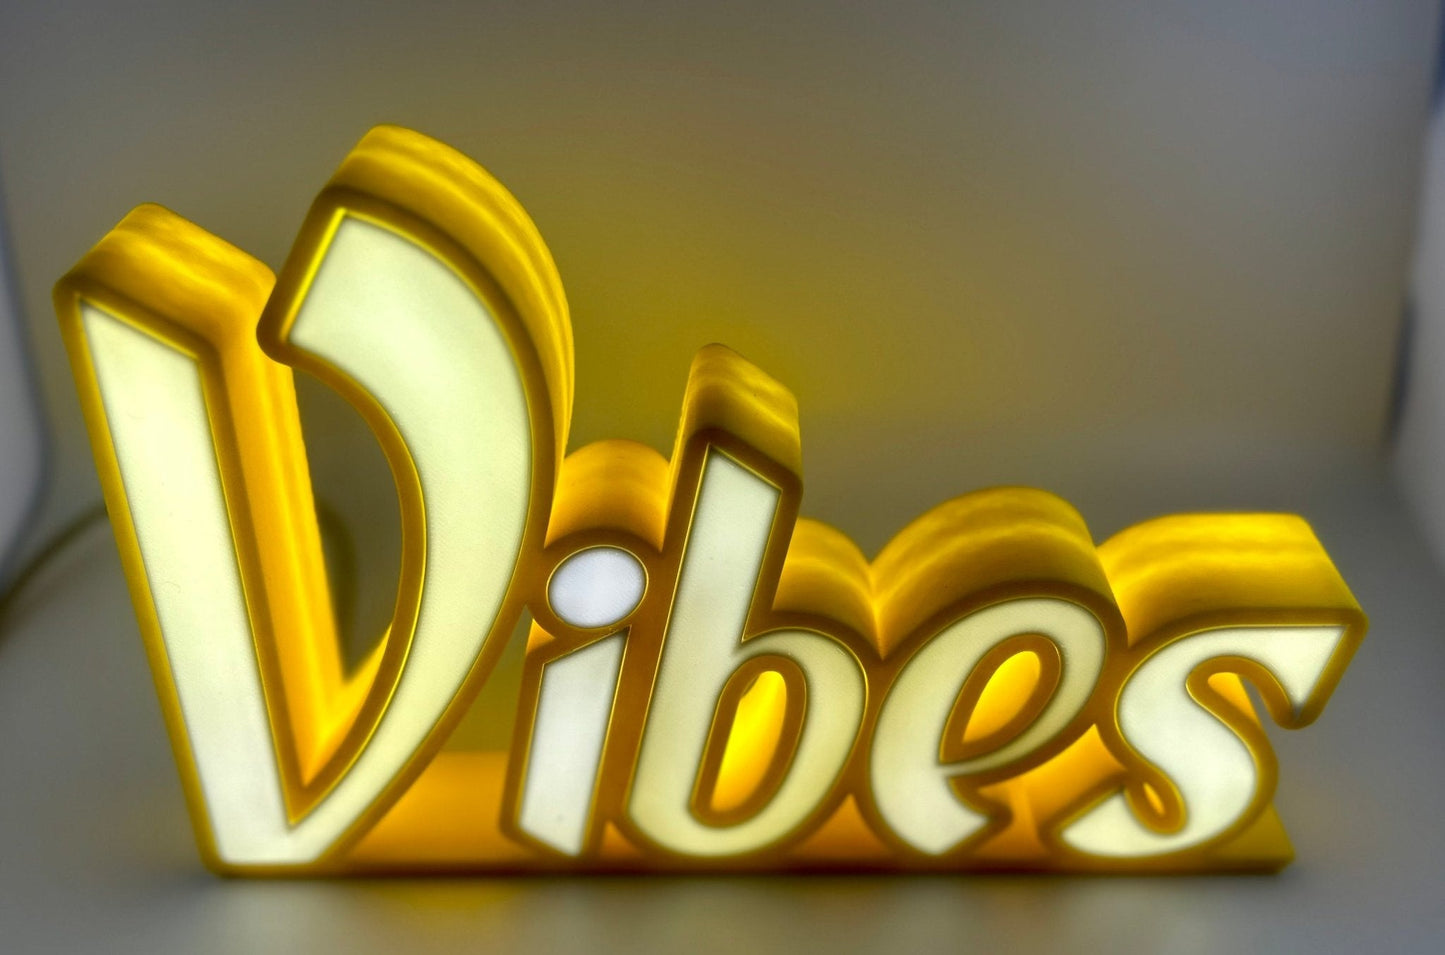 "Vibes" LED Sign - 3D Printed, Customizable Colors, Remote Controlled, 5V USB Powered Room Décor - RudeGrain3d Printed led Lit Sign